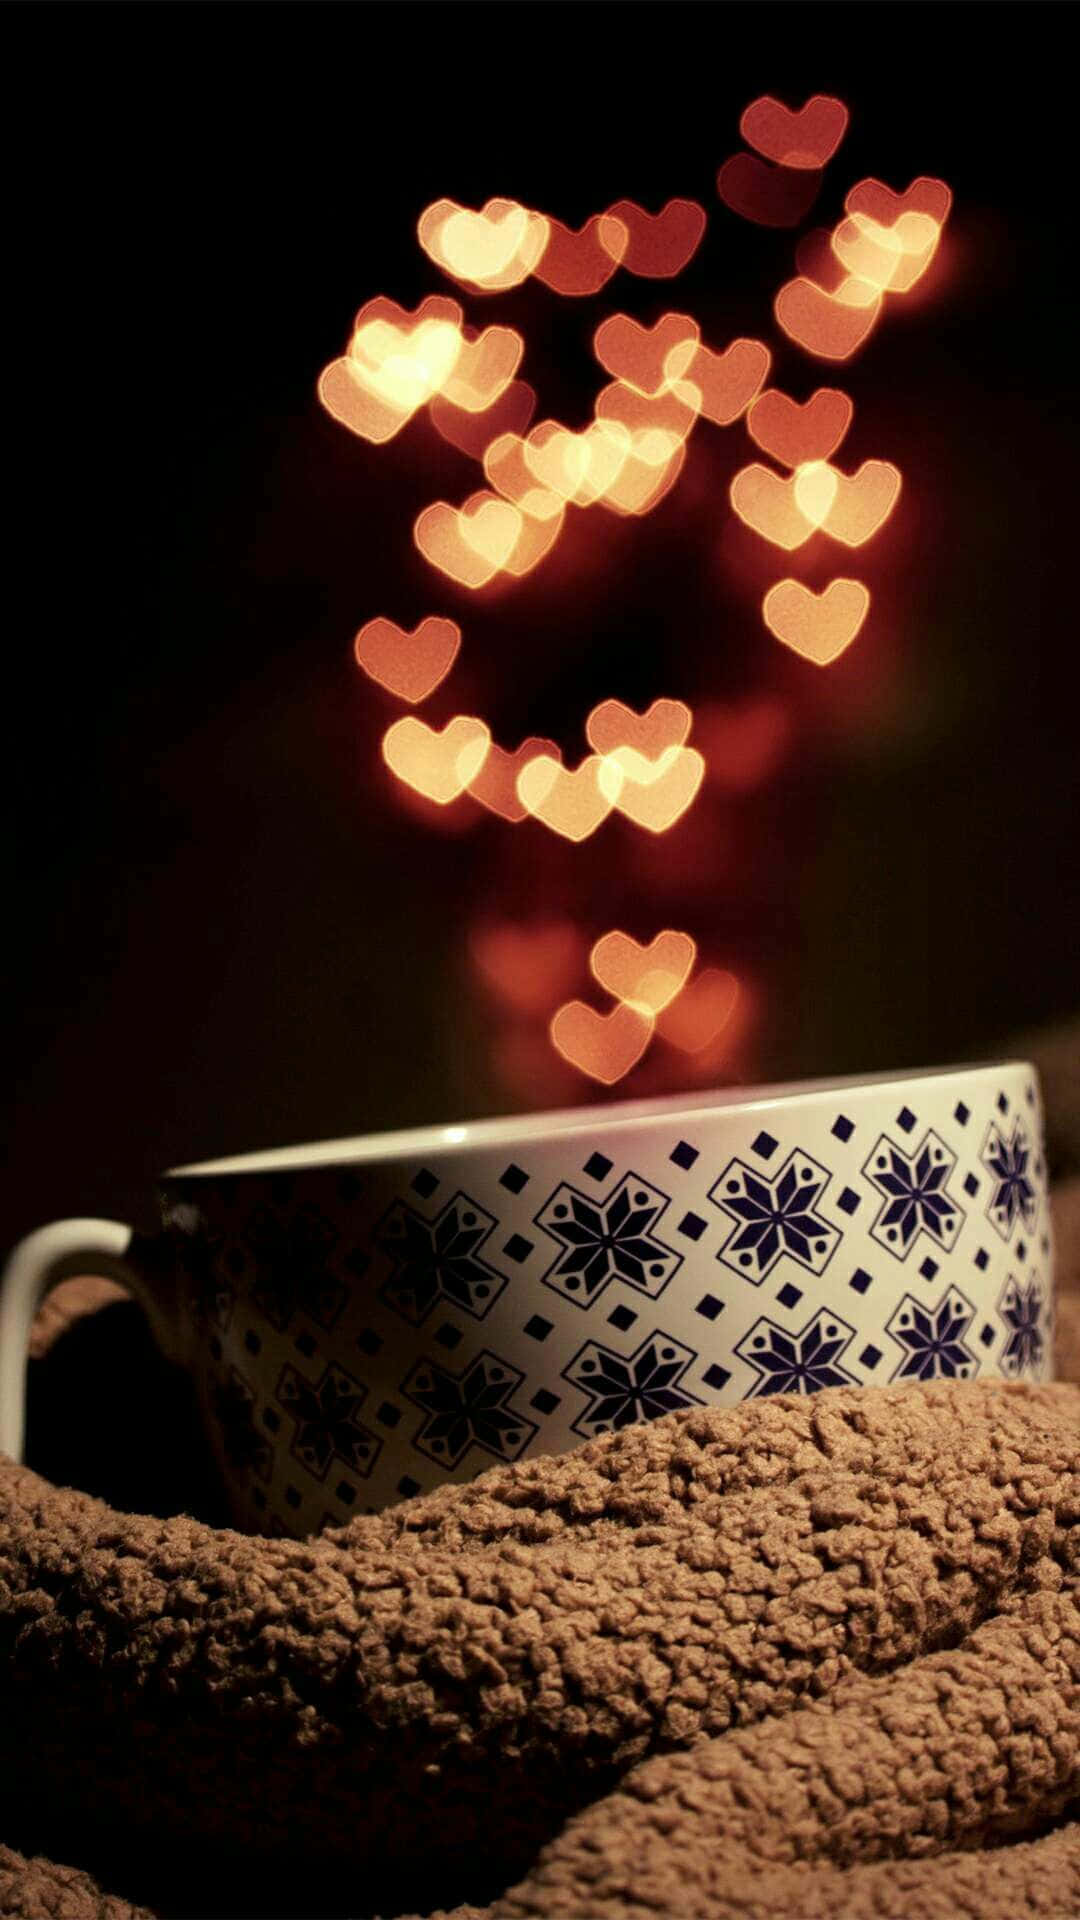 A Cup With Hearts On It Wallpaper